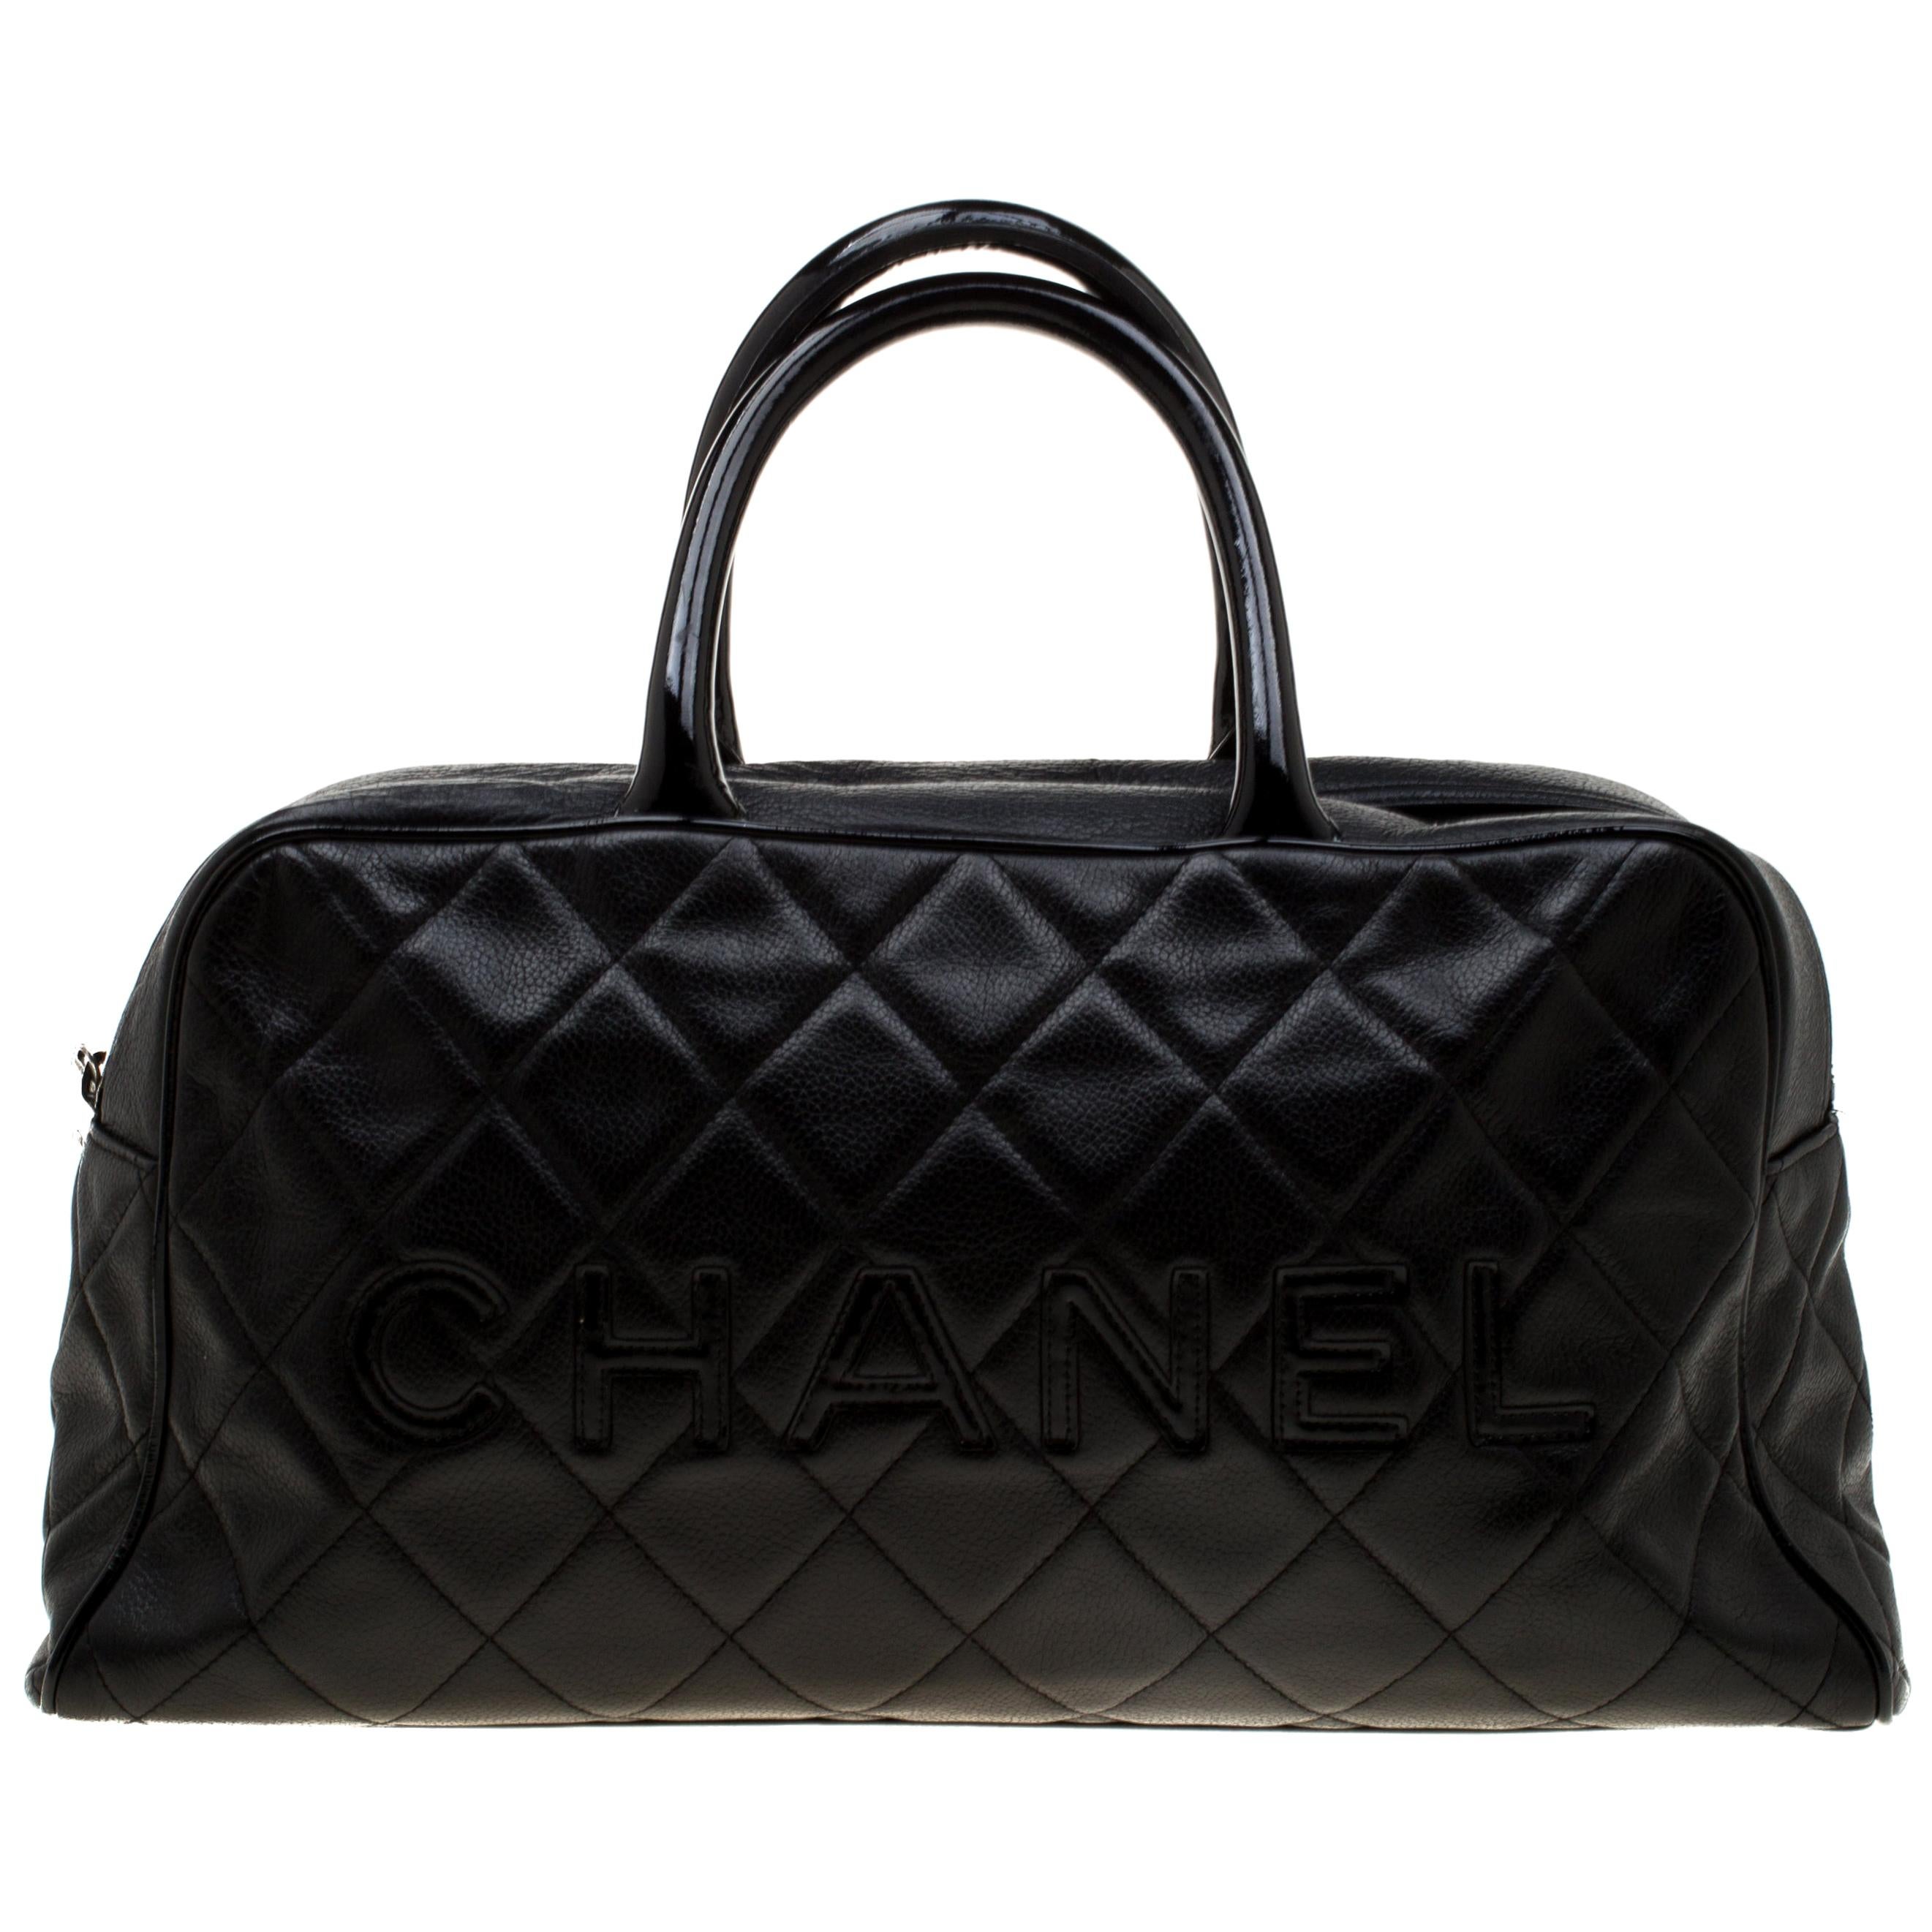 Chanel Black Quilted Leather Enamel Boston Bag